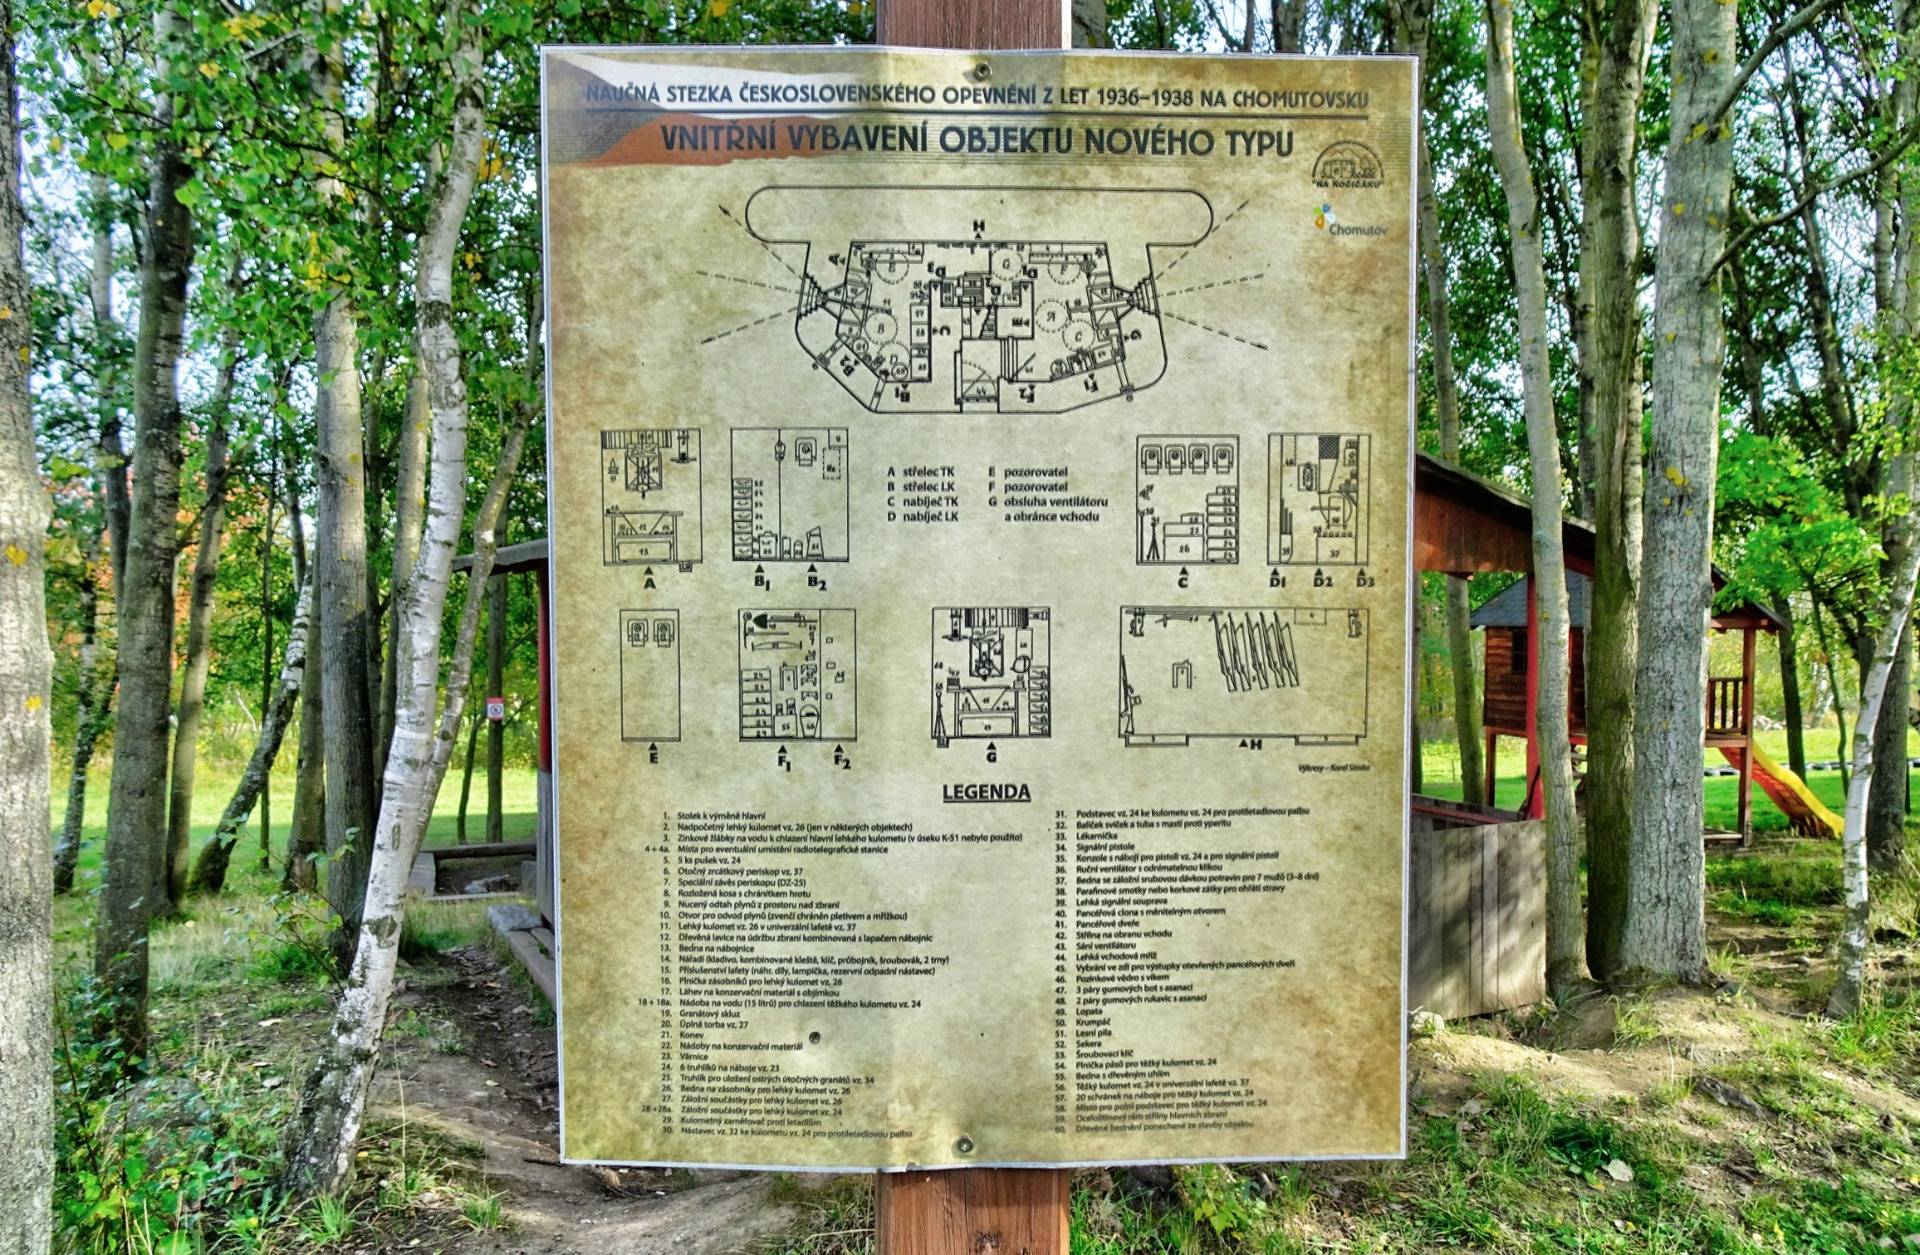 The plan of the bunker